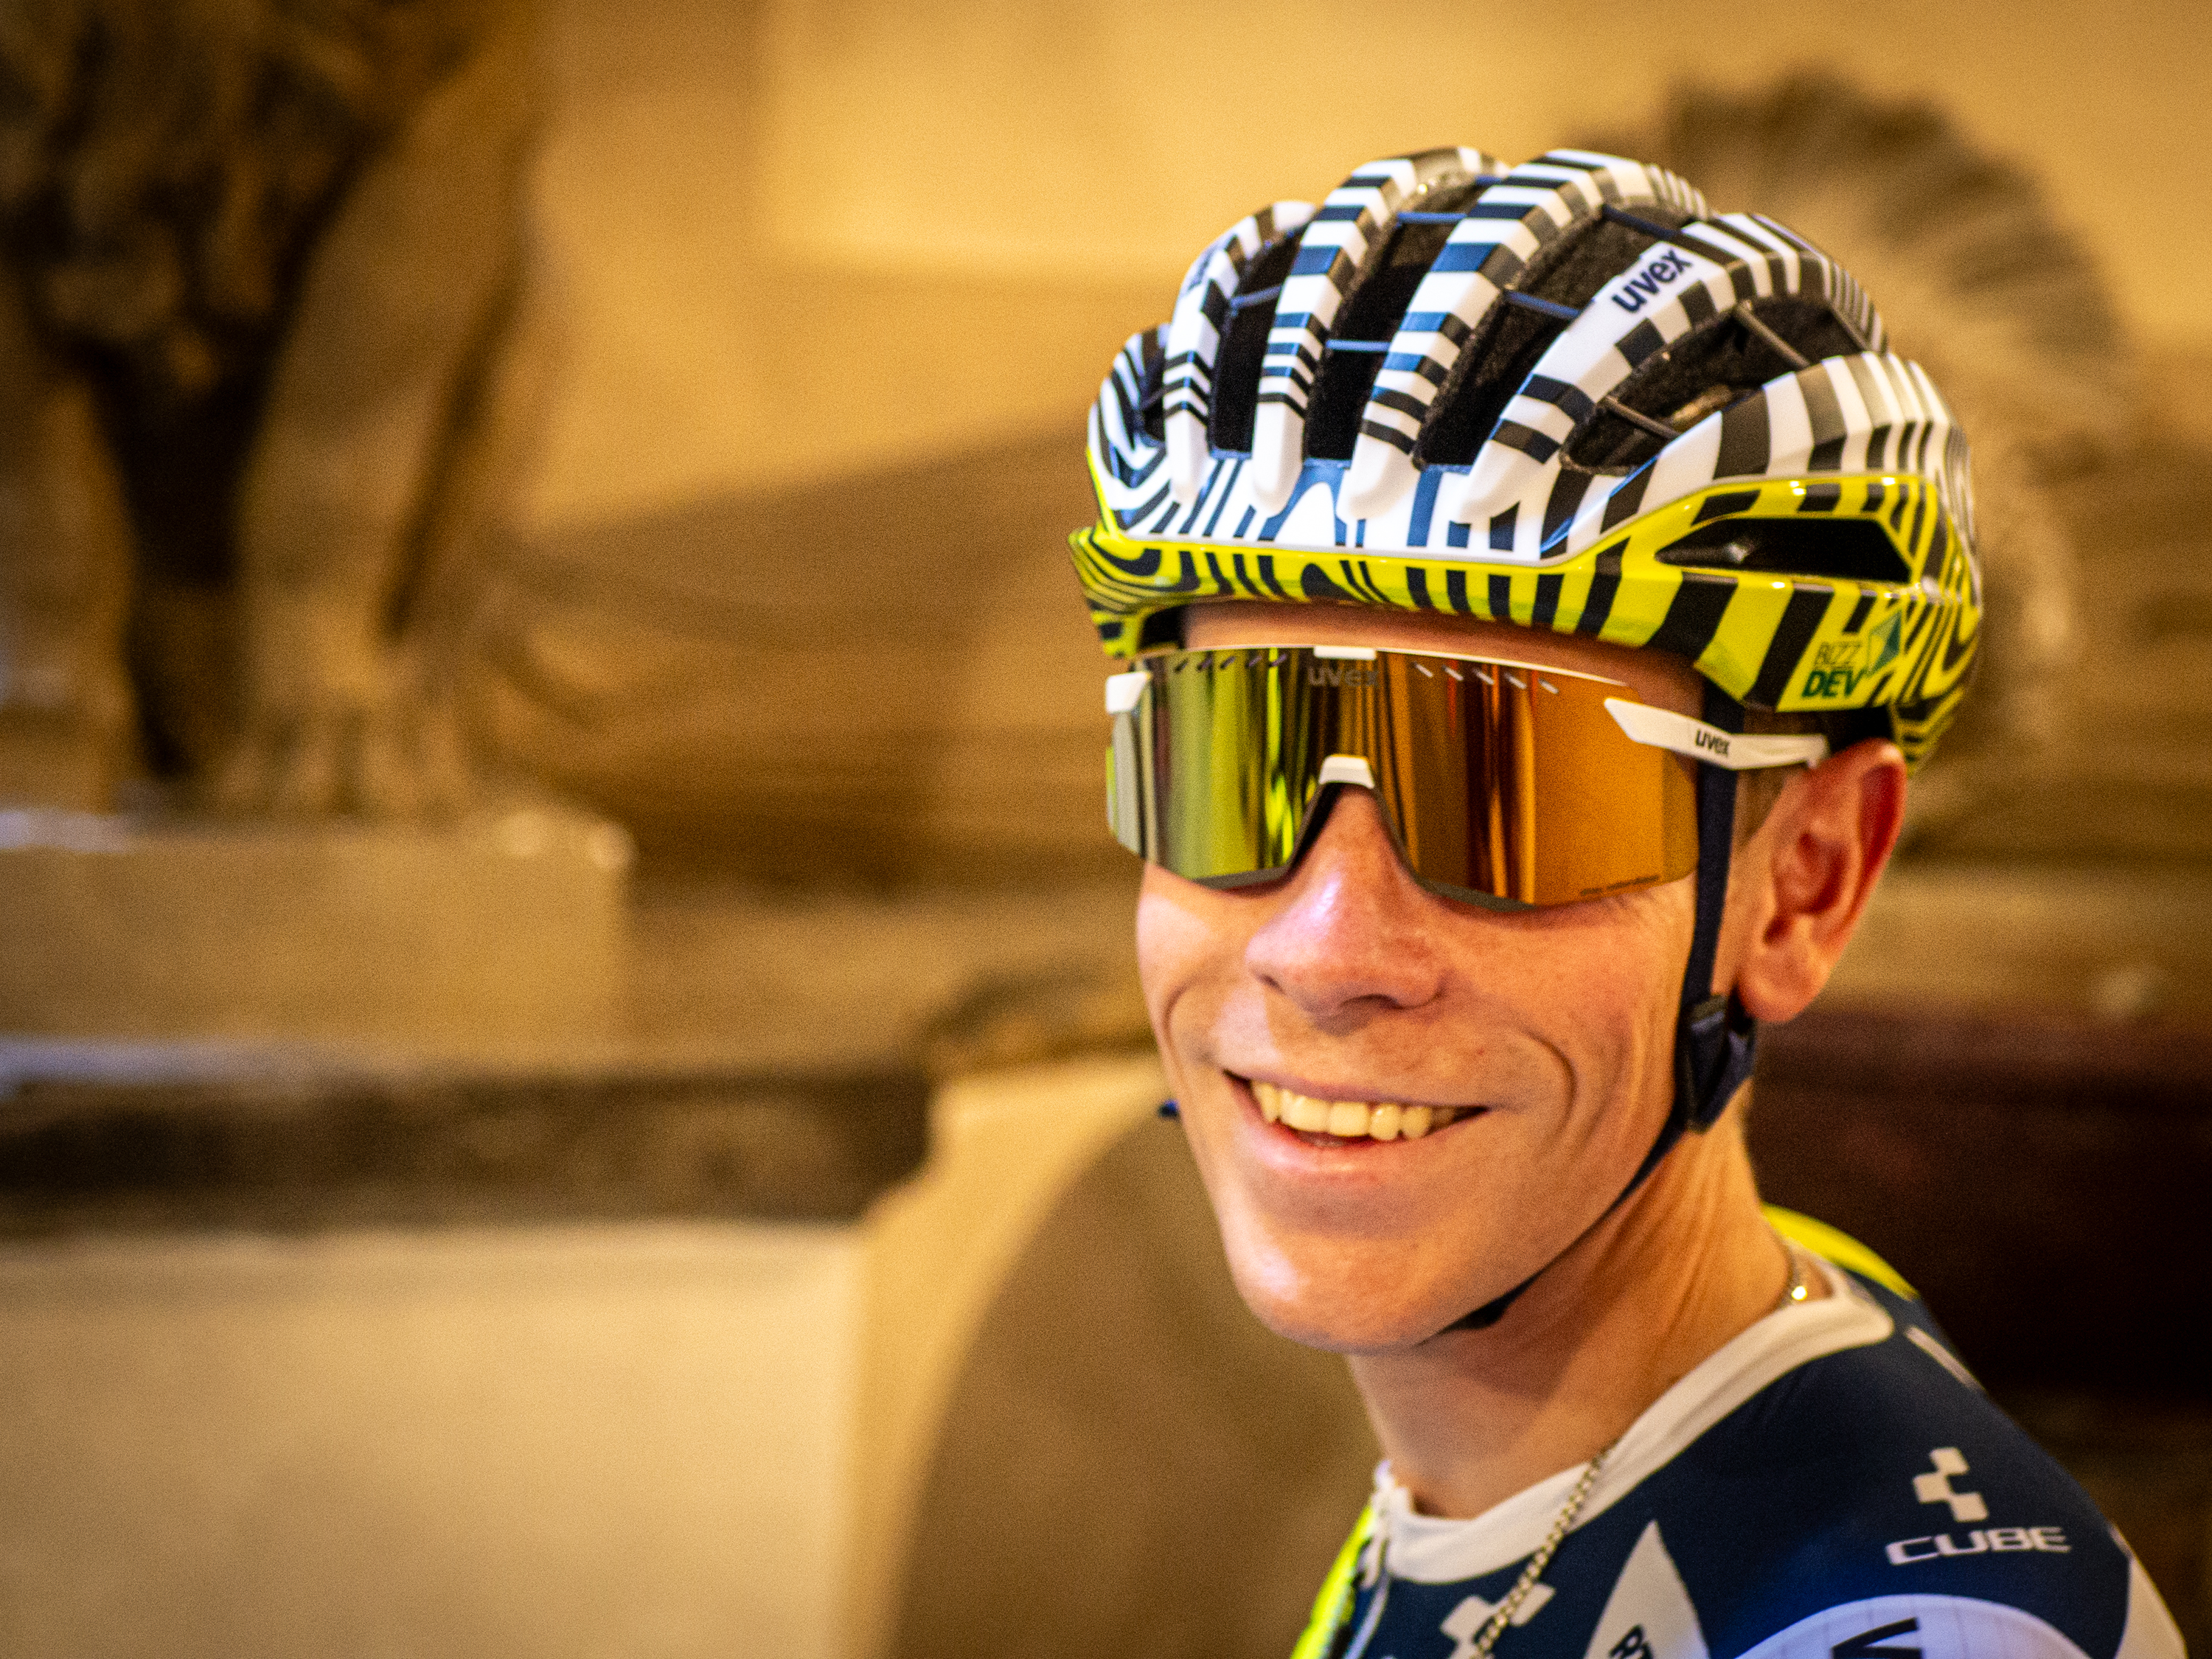 Intermarche Wanty rider poses with a new black and white Uvex helmet